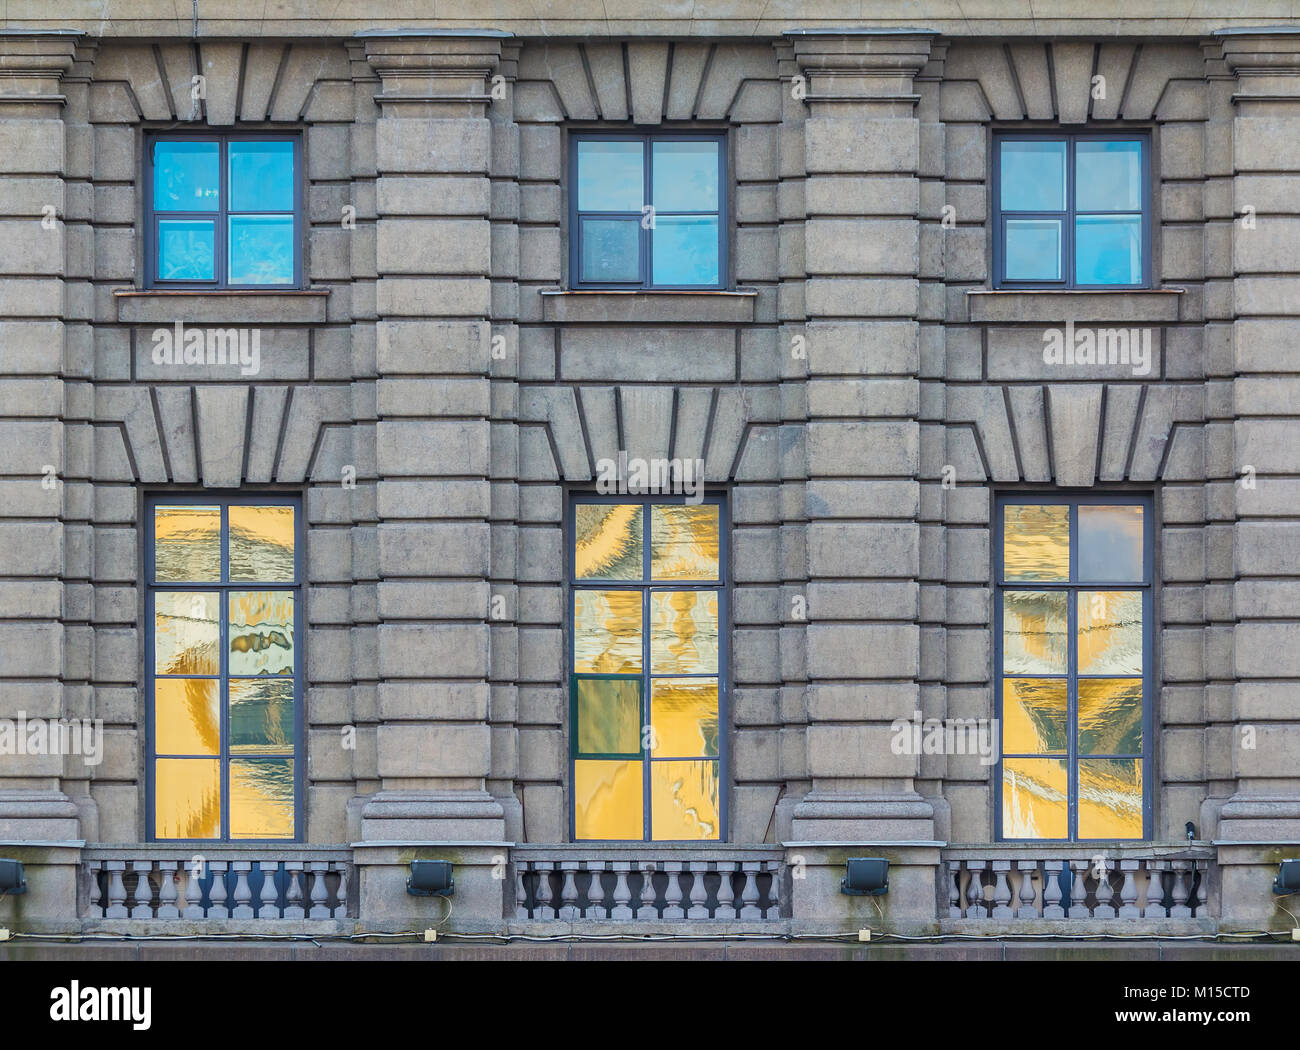 Several windows in a row on the facade of the urban historic building front view, Saint Petersburg, Russia Stock Photo